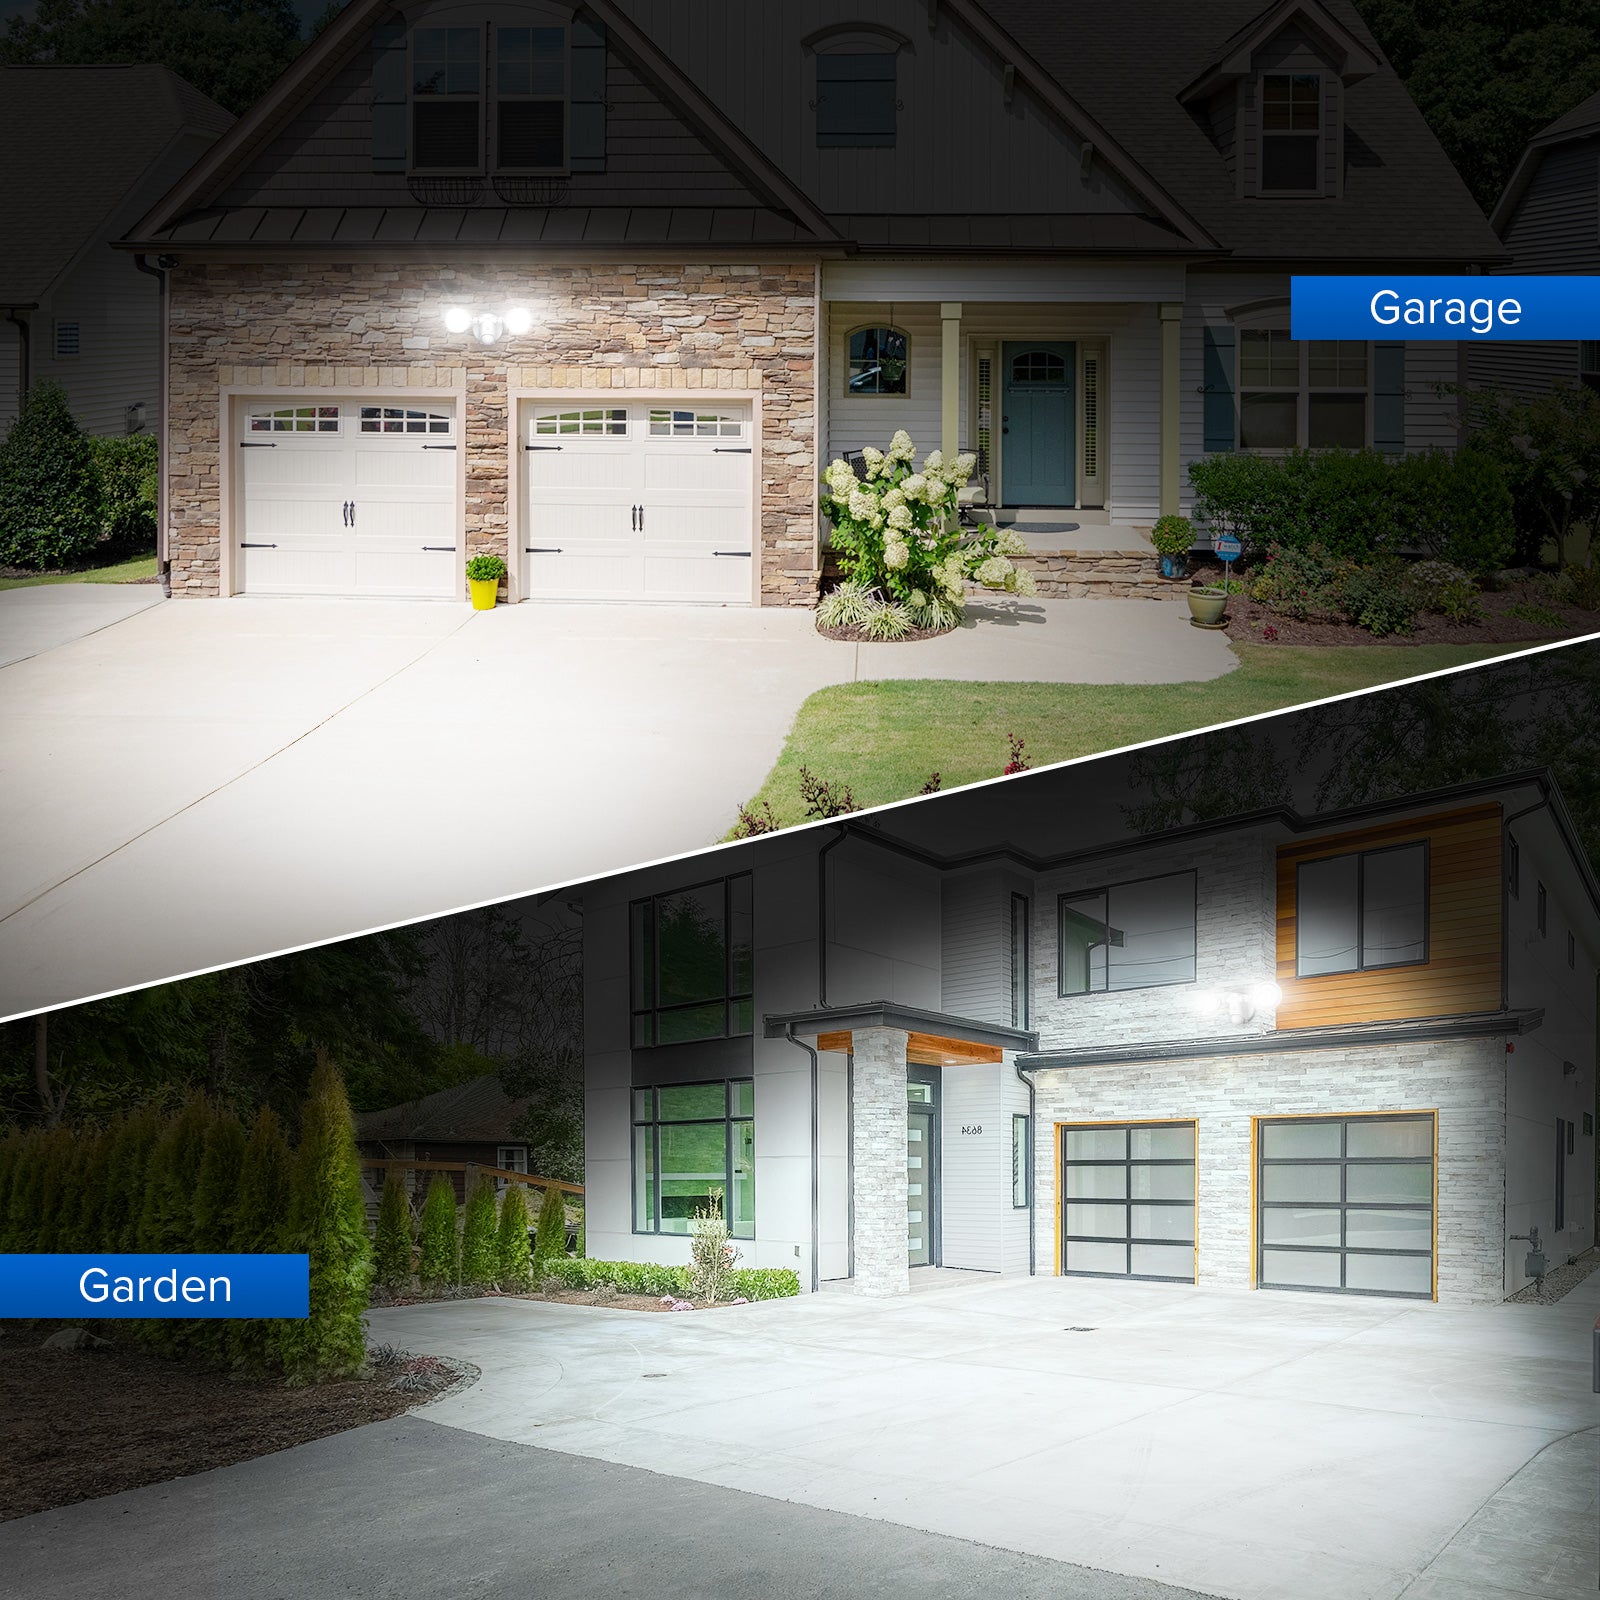 Upgraded 30W LED Security Light (Motion Sensor) is suitable for garage and garden